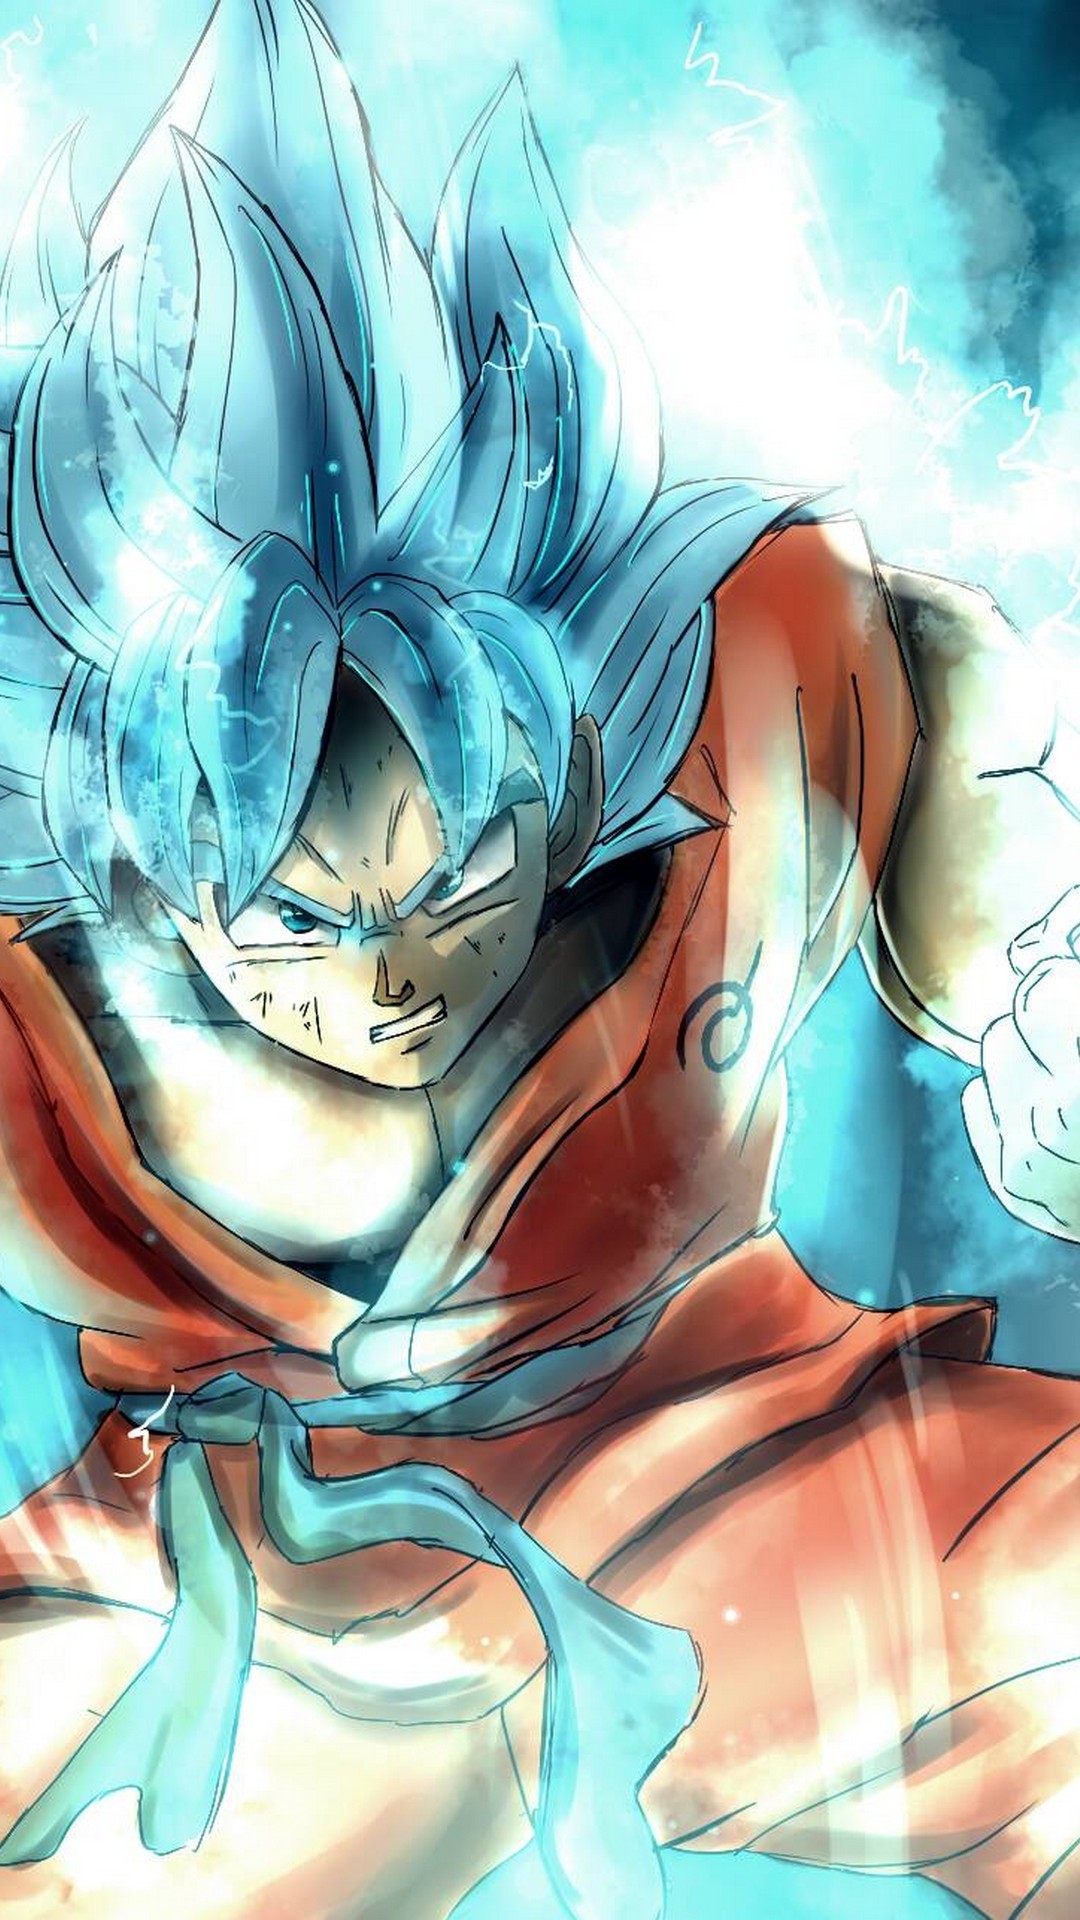 Goku SSJ Blue Wallpaper iPhone with resolution 1080X1920 pixel. You can make this wallpaper for your iPhone 5, 6, 7, 8, X backgrounds, Mobile Screensaver, or iPad Lock Screen